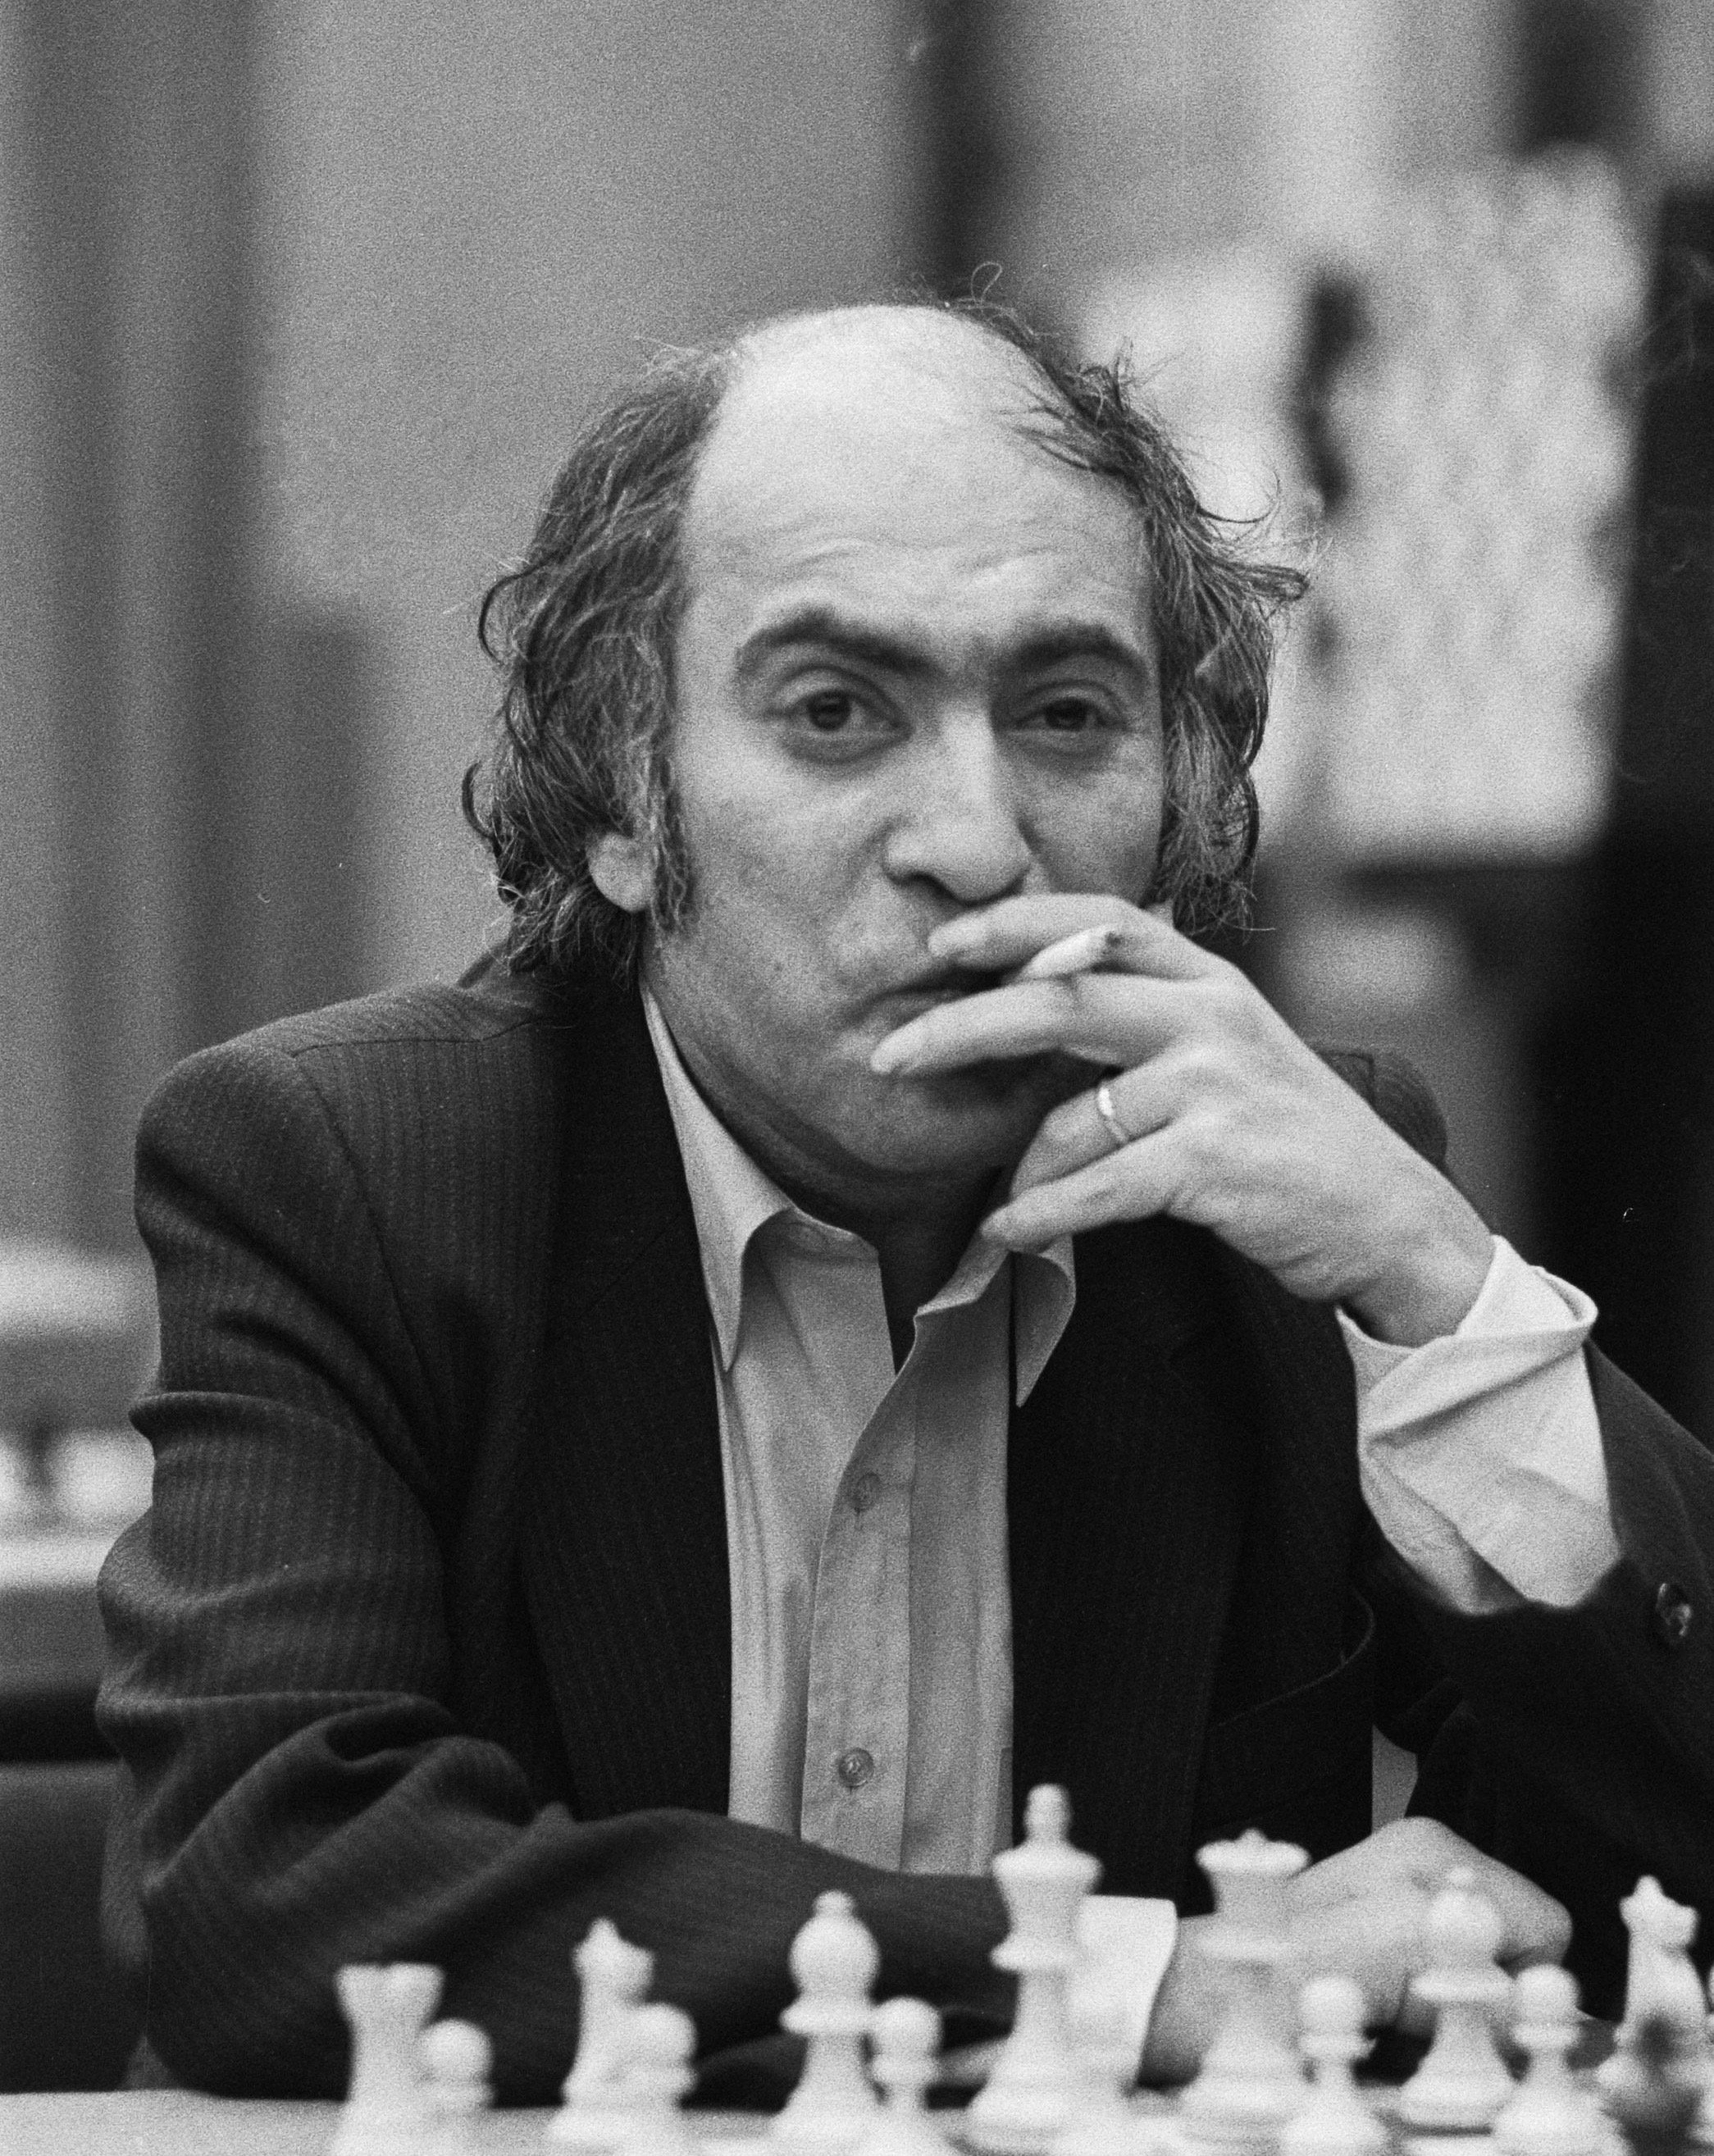 One of the best chess players ever, mad creative, insane alcoholic heavy smoker